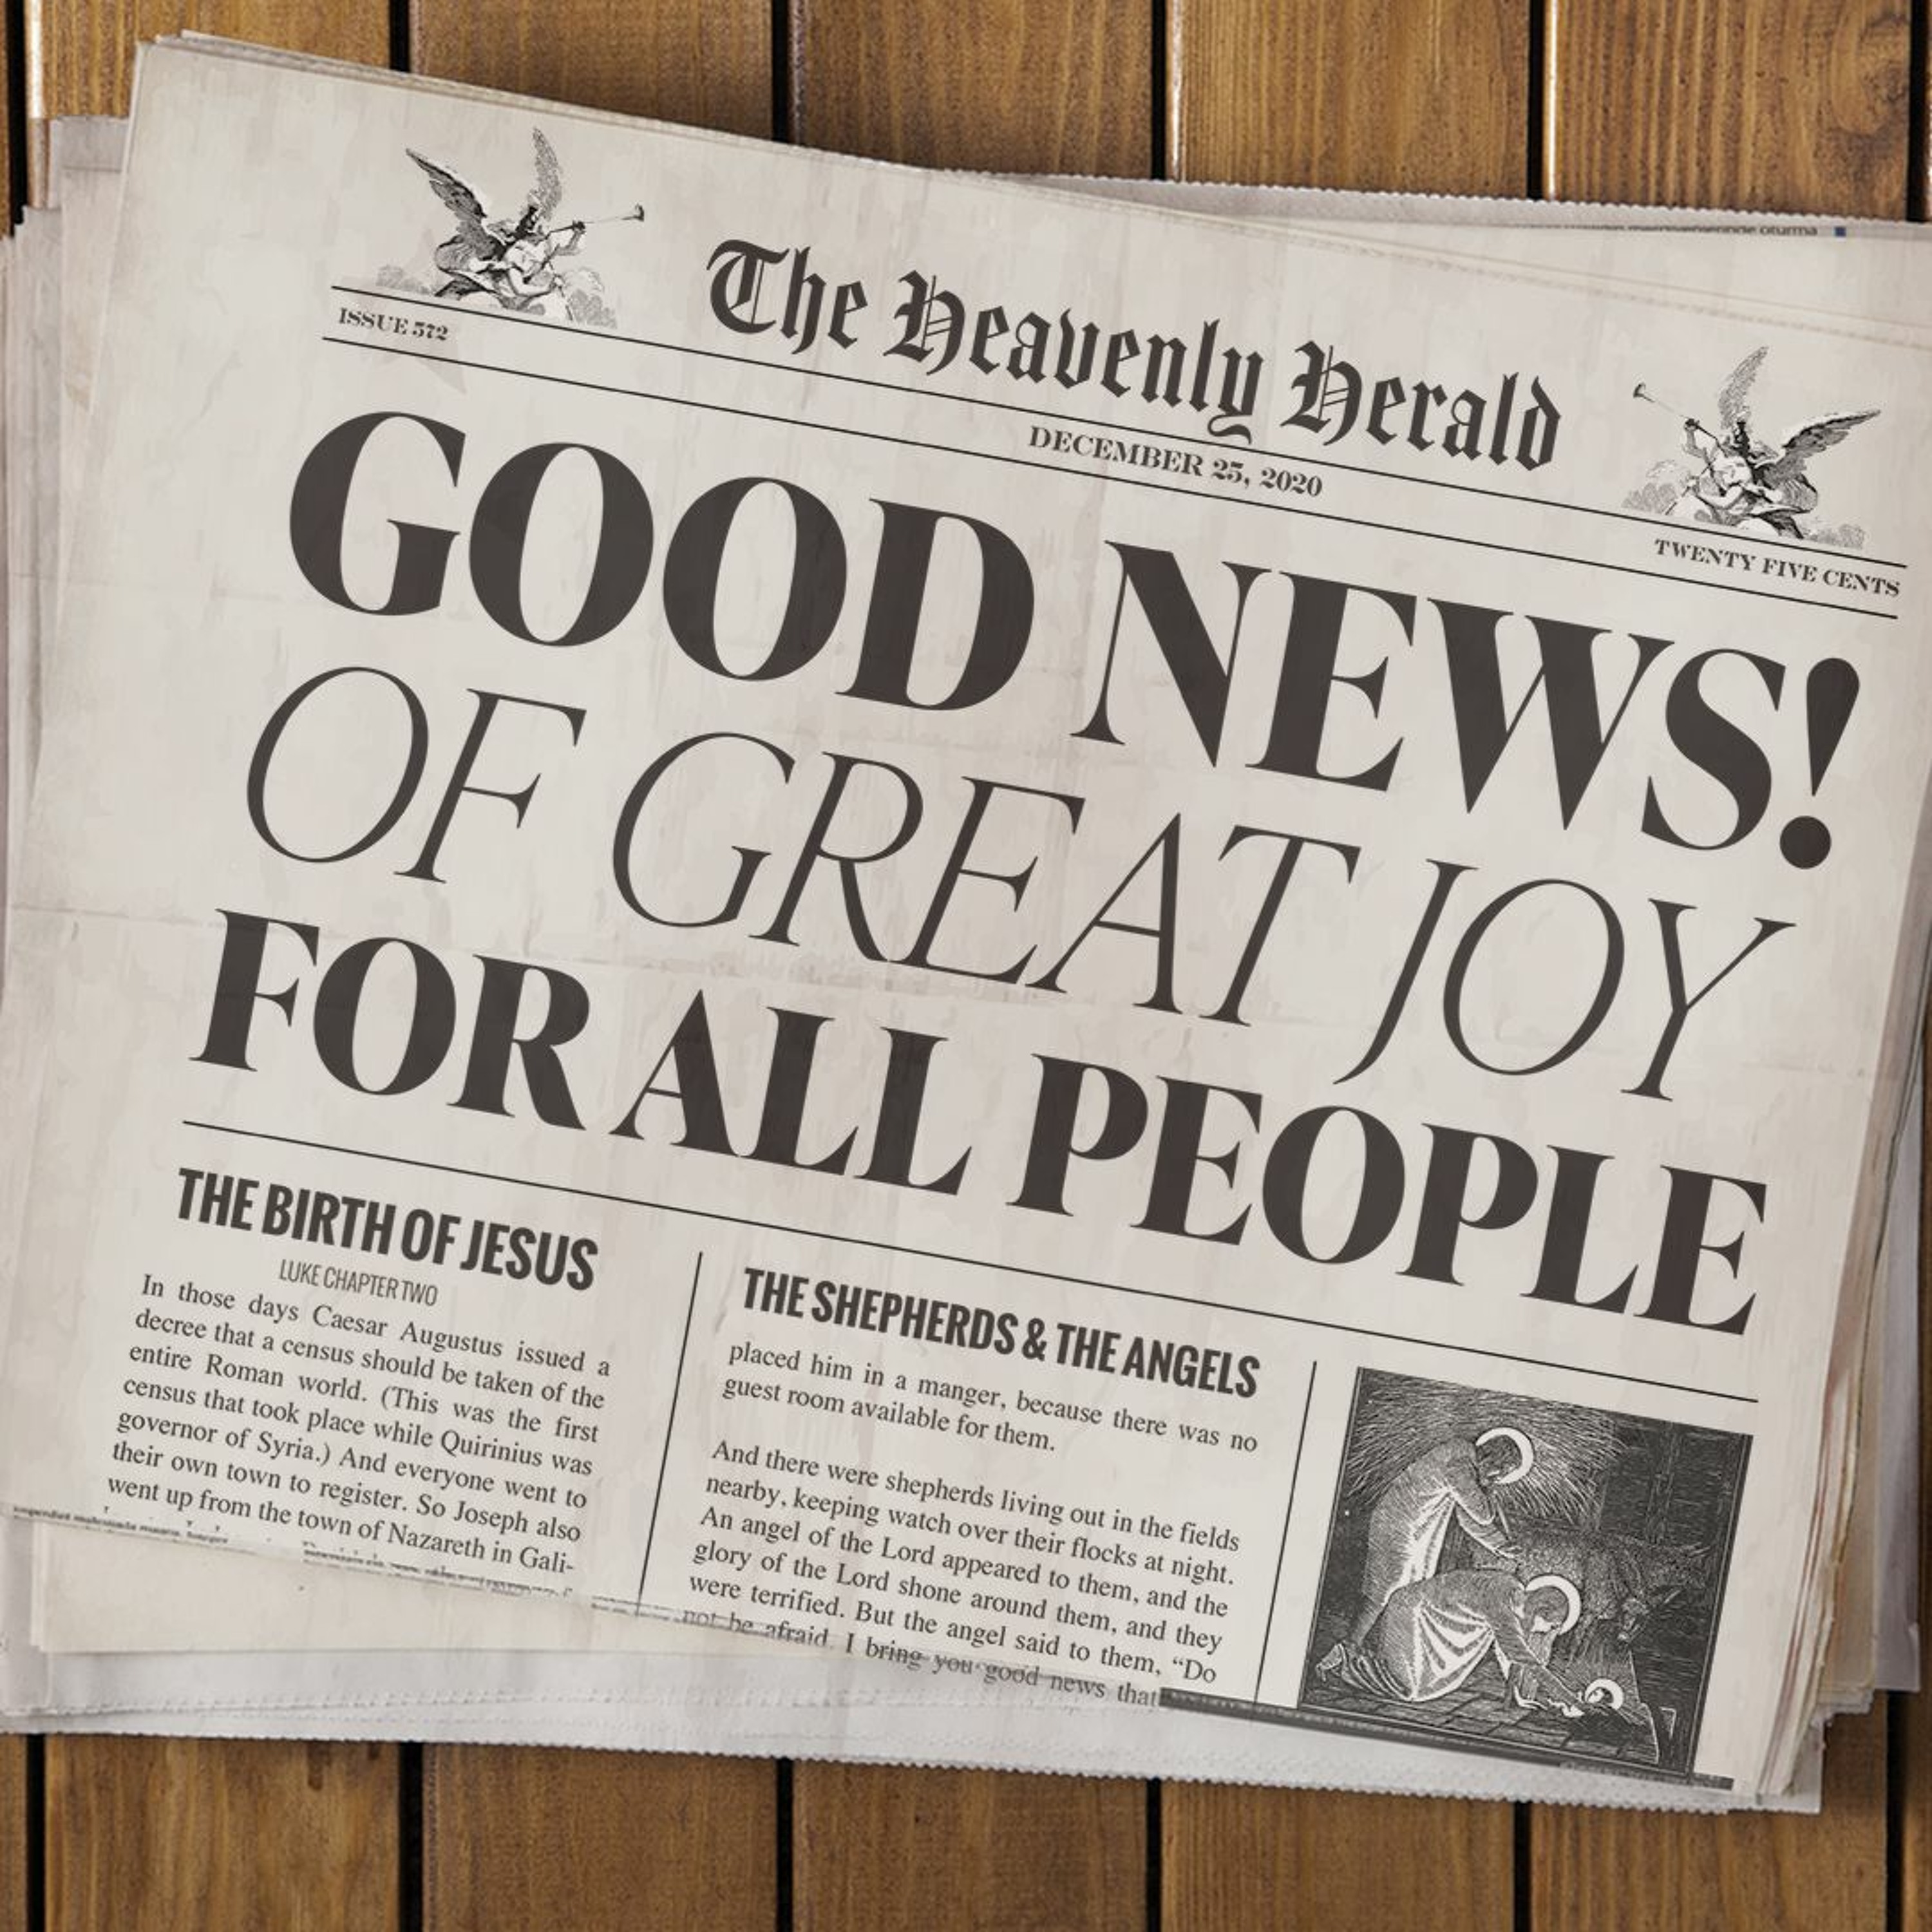 Looking Forward | Good News. Great Joy. All People. | Ethan Magness